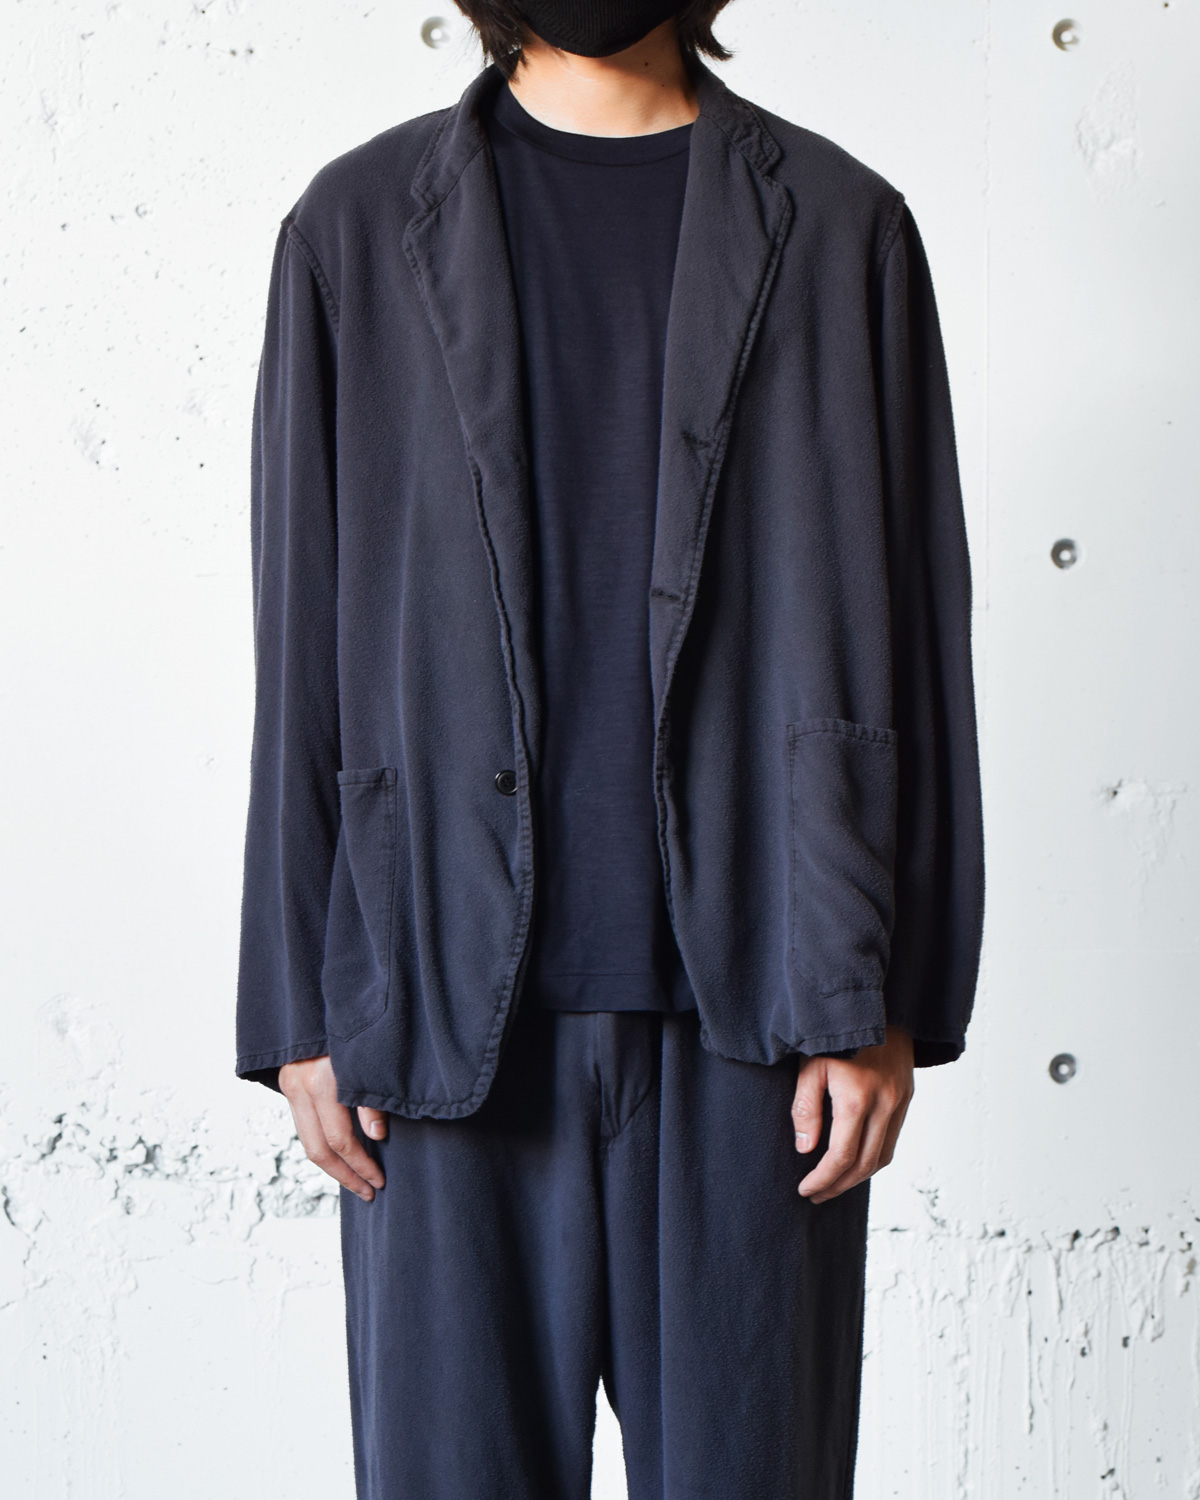 COMOLI “AW21 COLLECTION” -3rd DELIVERY- | MAIDENS SHOP | メイデンズショップ